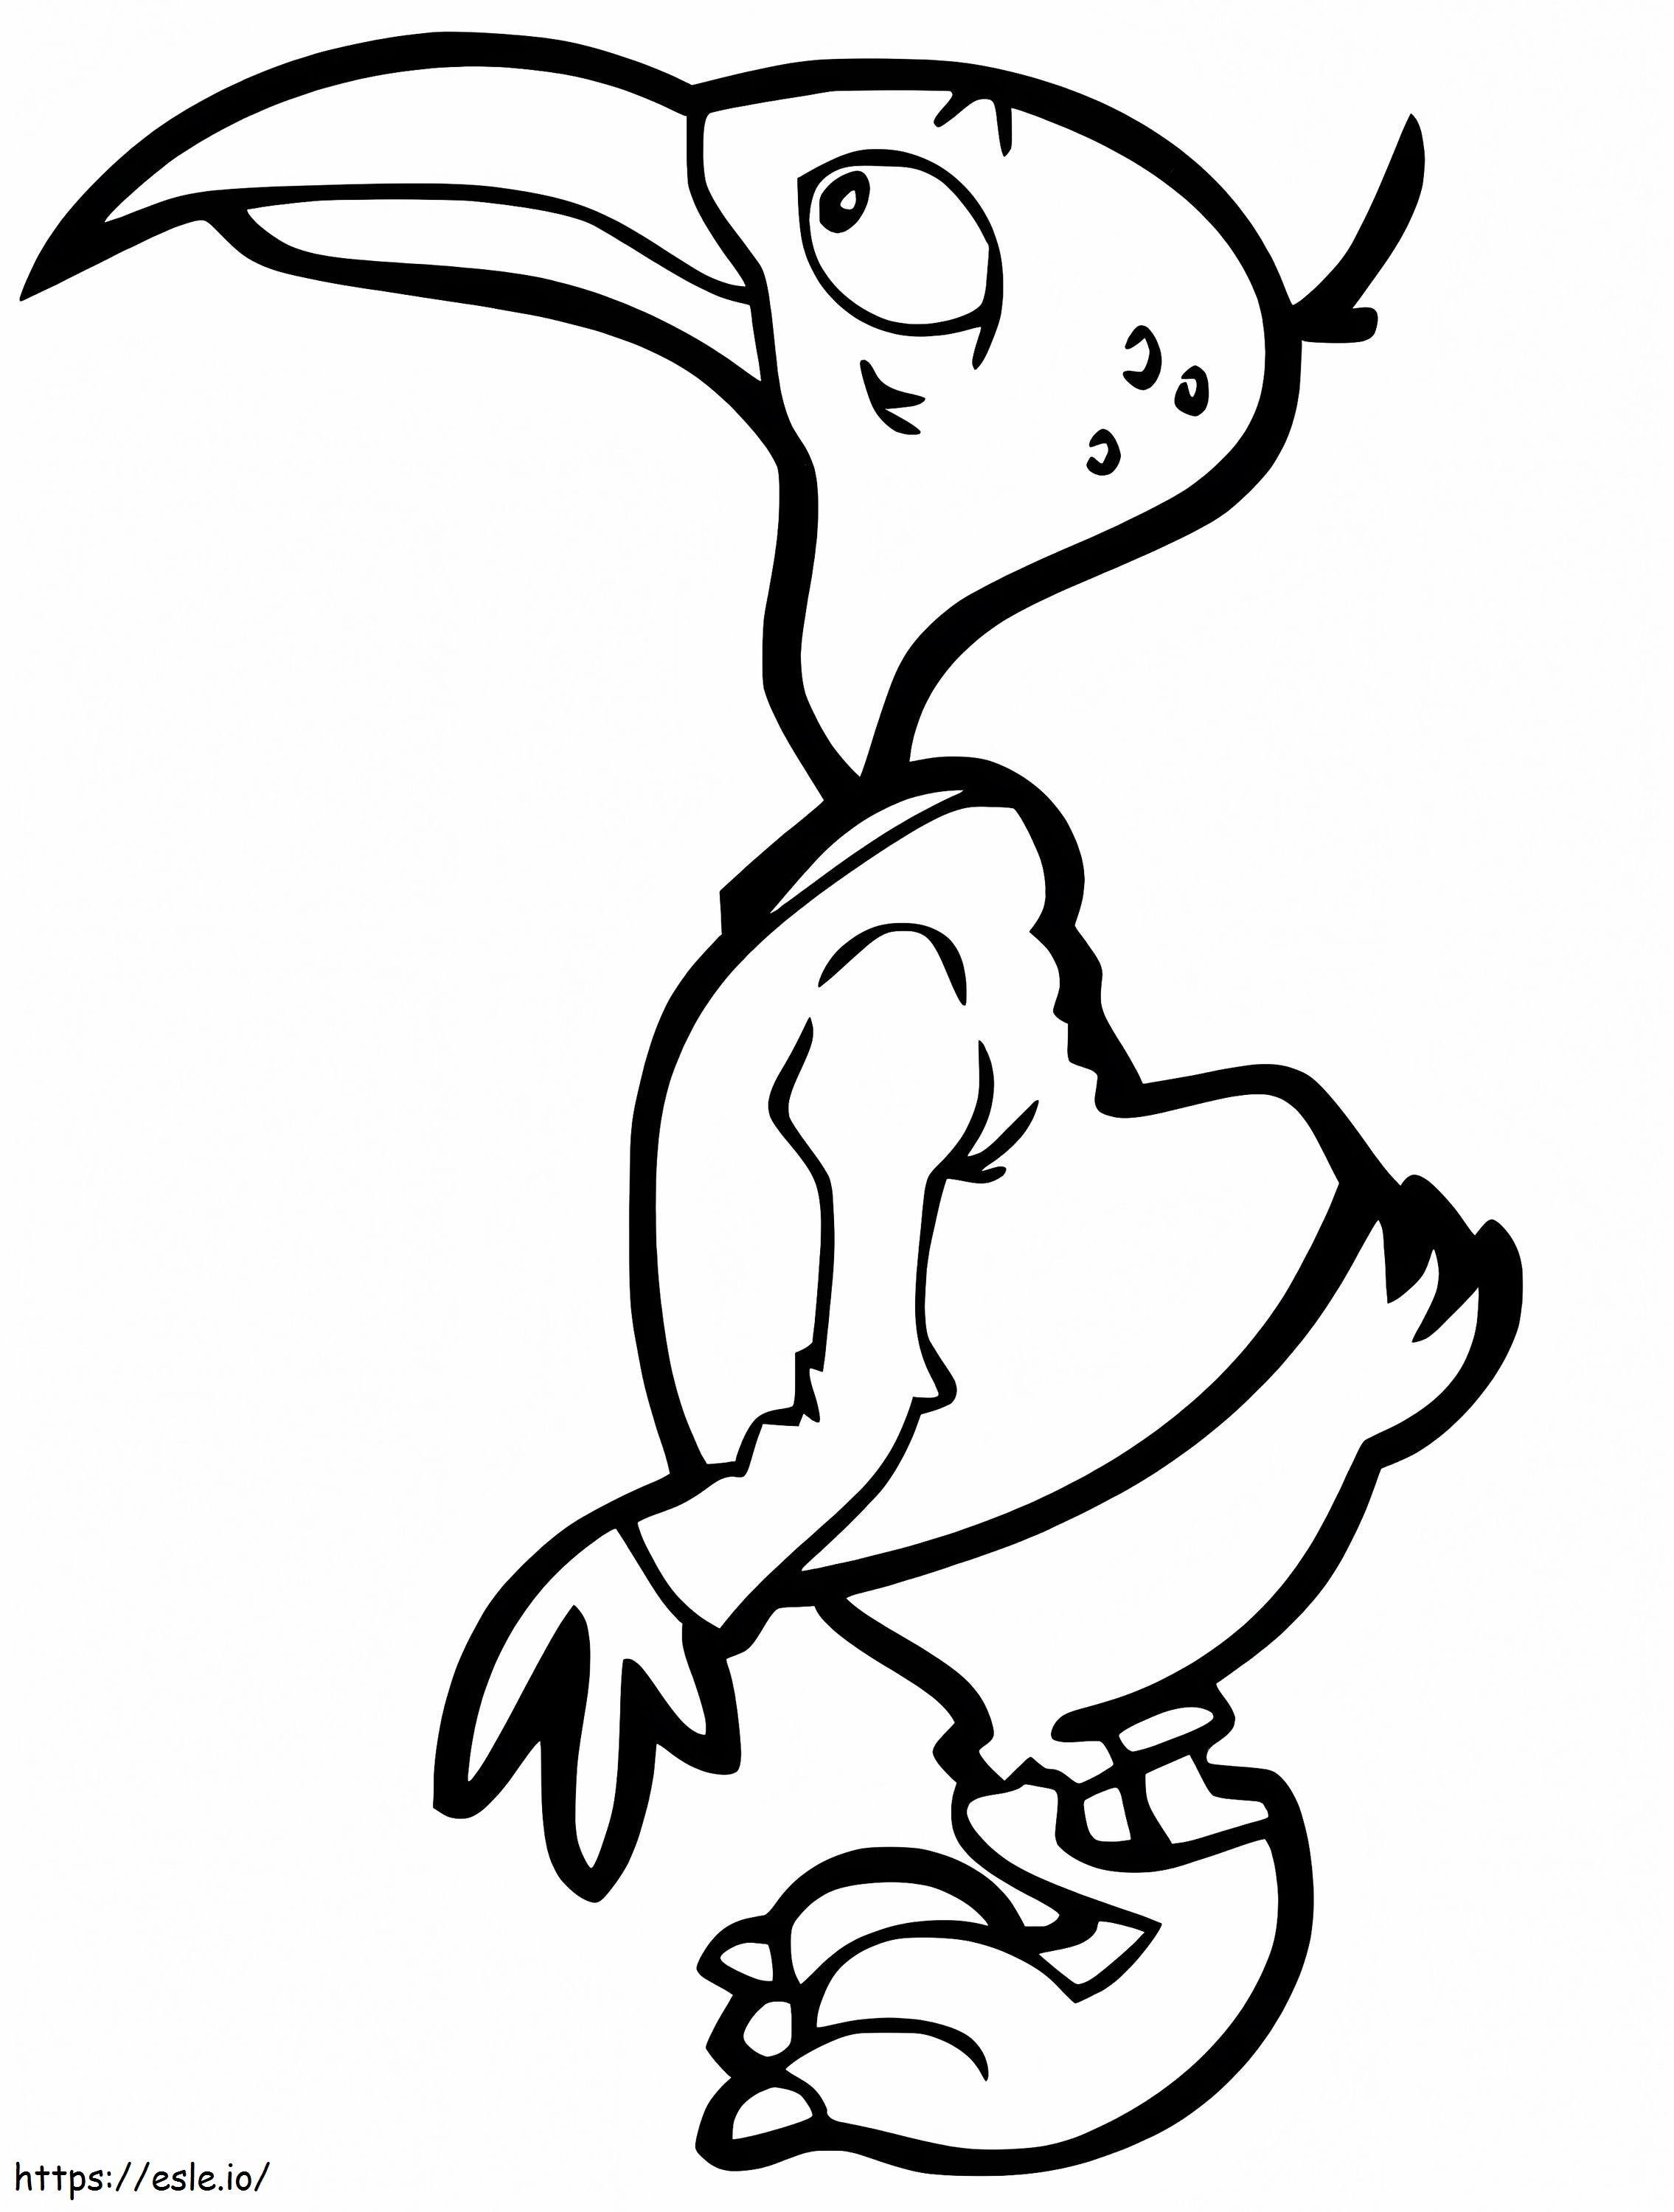 Cartoon Vulture coloring page